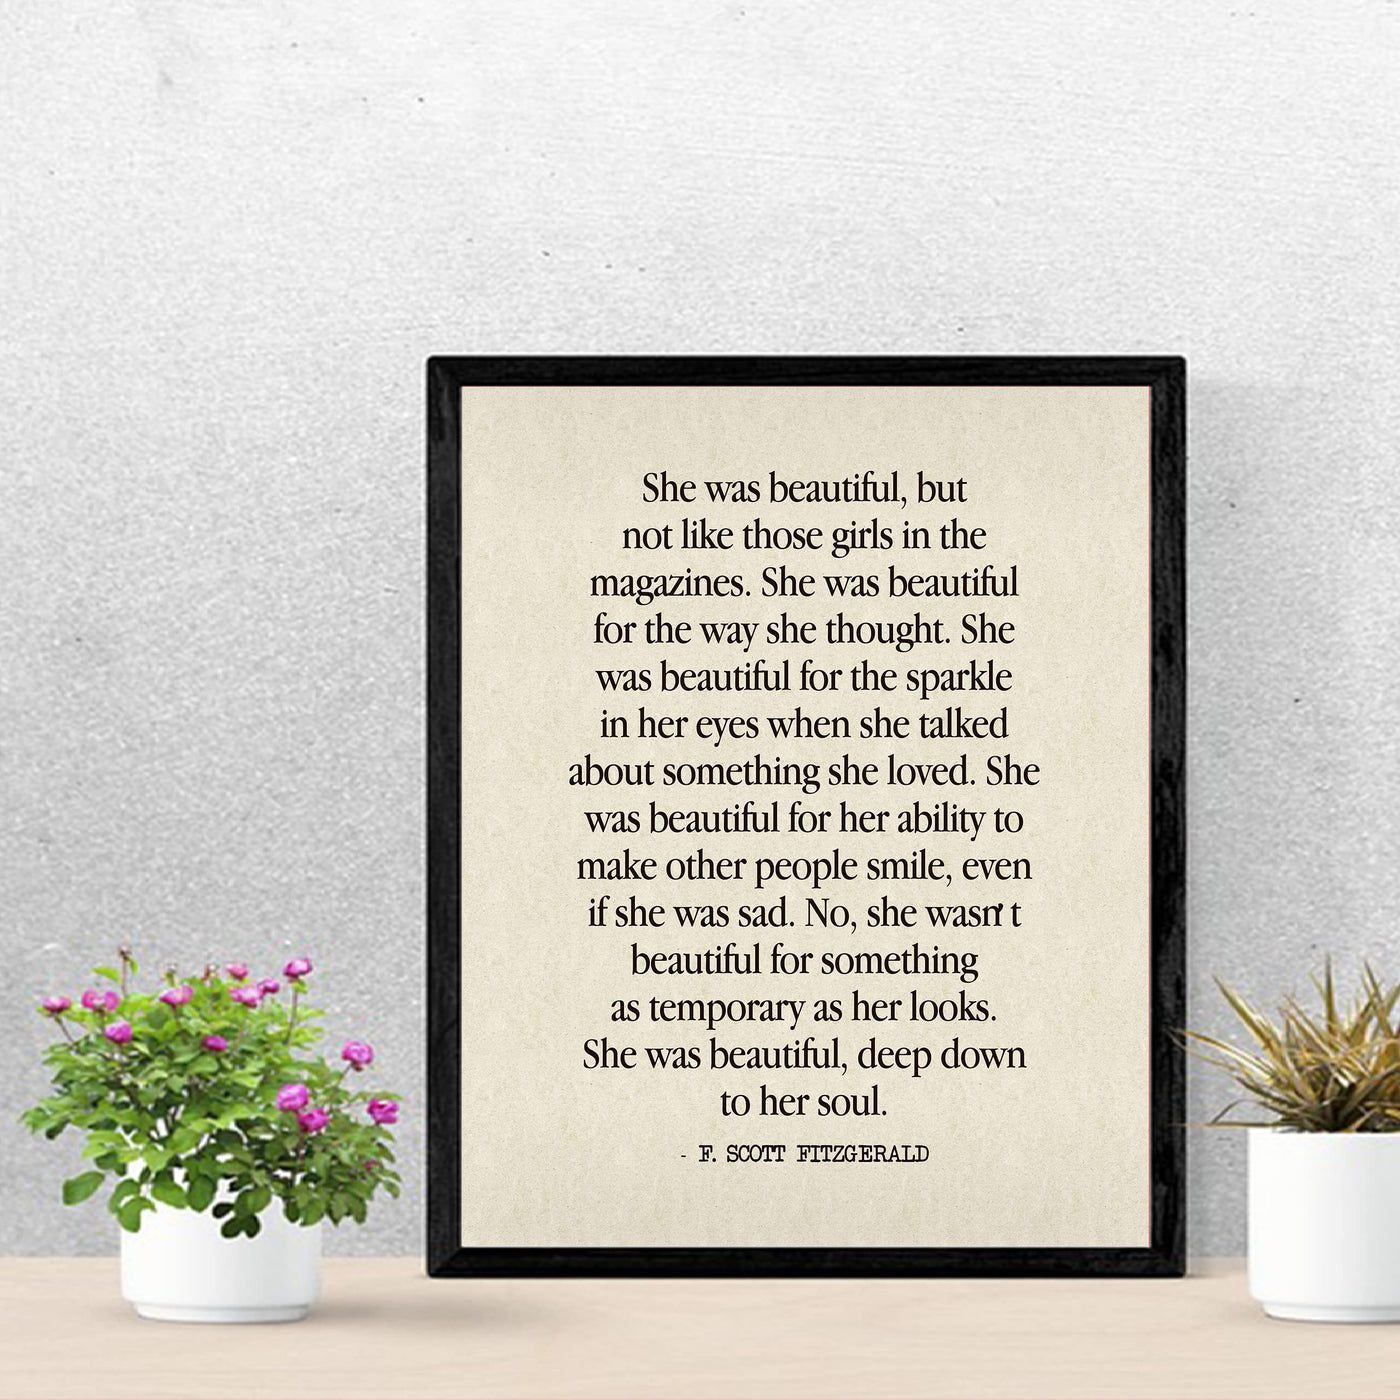 F. Scott Fitzgerald Quotes-"She Was Beautiful-Deep Down to Her Soul" Inspirational Wall Art Sign -11 x 14" Poetic Poster Print -Ready to Frame. Perfect Home-Office-Library-Study Decor! Great Gift!